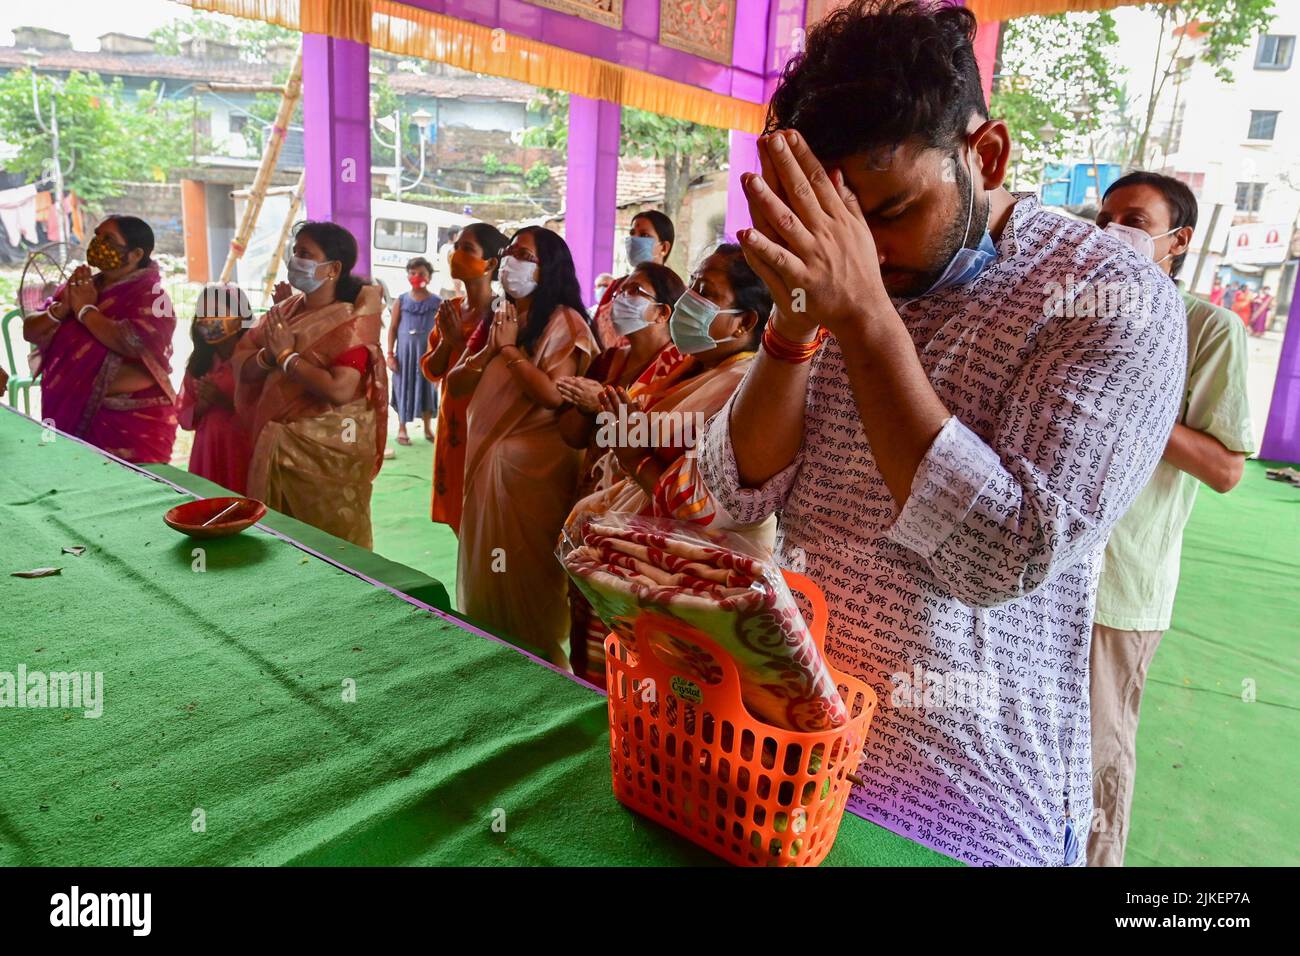 Howrah, West Bengal, India - 14th October 2021 : Hindu devotees offering pushpanjali to Goddess Durga, ritual to worship the Goddess with flowers. Stock Photo